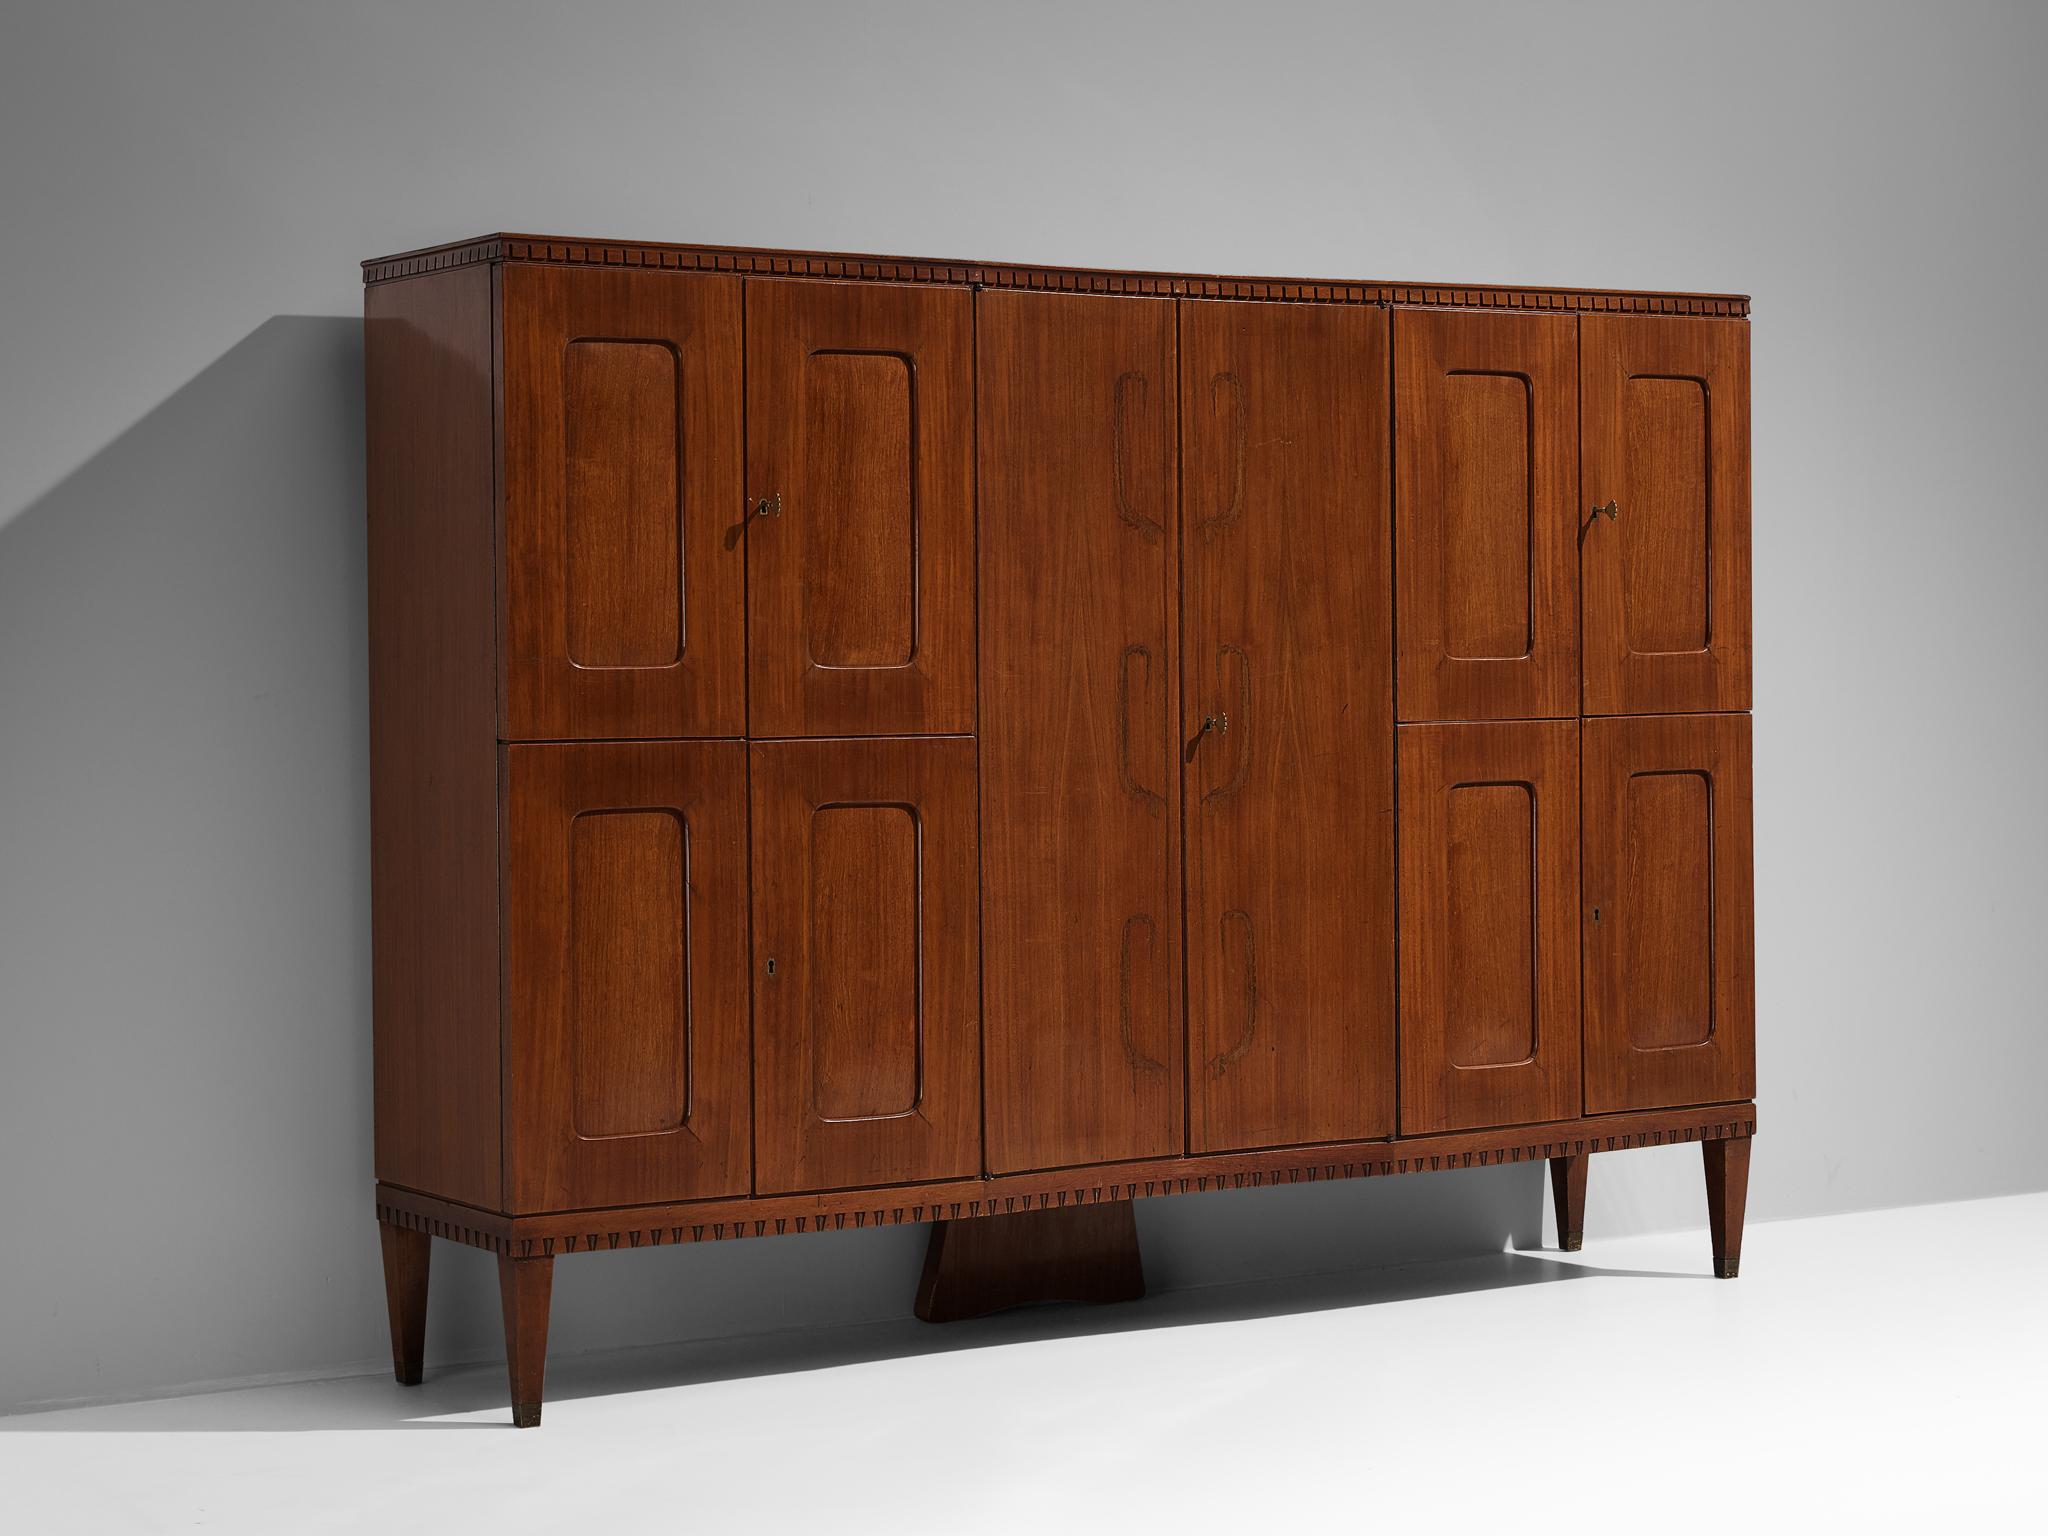 Attributed to Paolo Buffa, wardrobe, mahogany, brass, mirrored glass, glass, Italy, 1950s

The decorative elements, materials use, woodworking, and the overall composition suggest that this cabinet might have been crafted by the Italian master Paolo